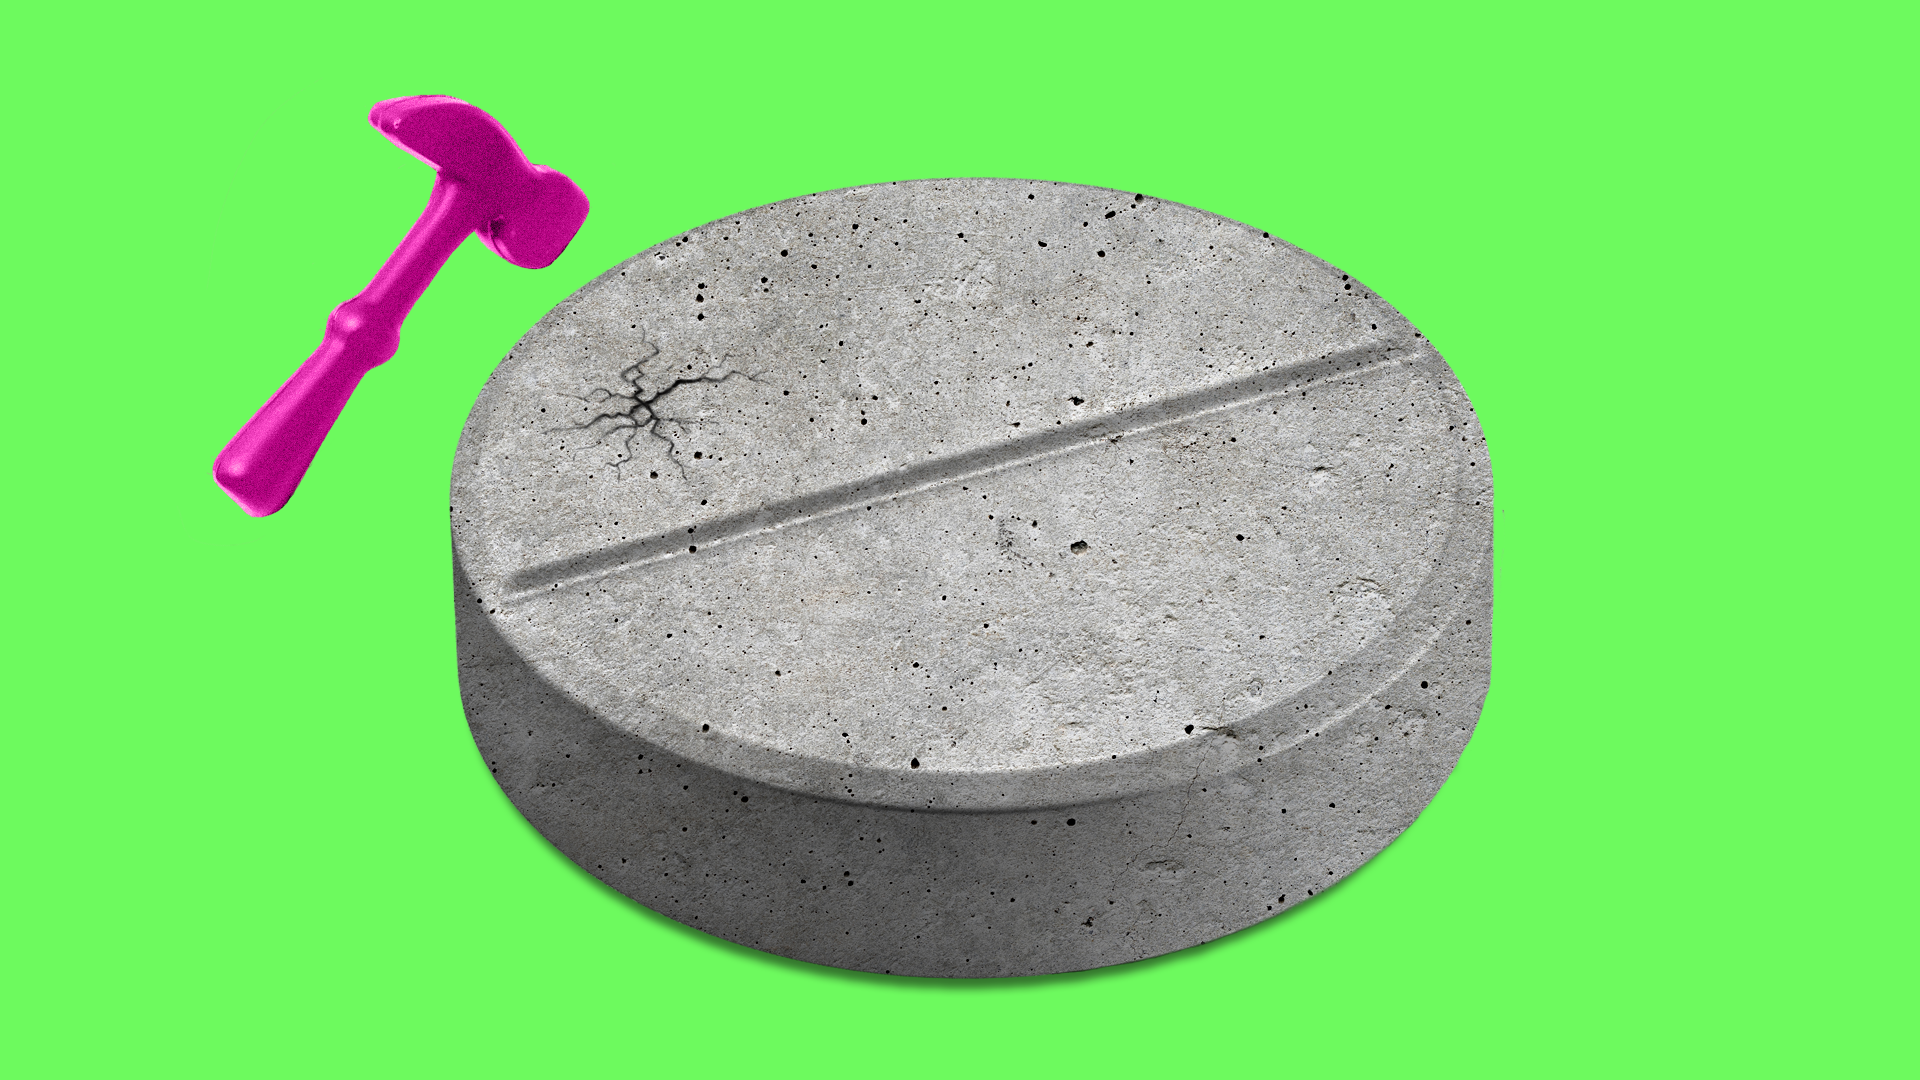 An illustration of a hammer and a concrete pill.